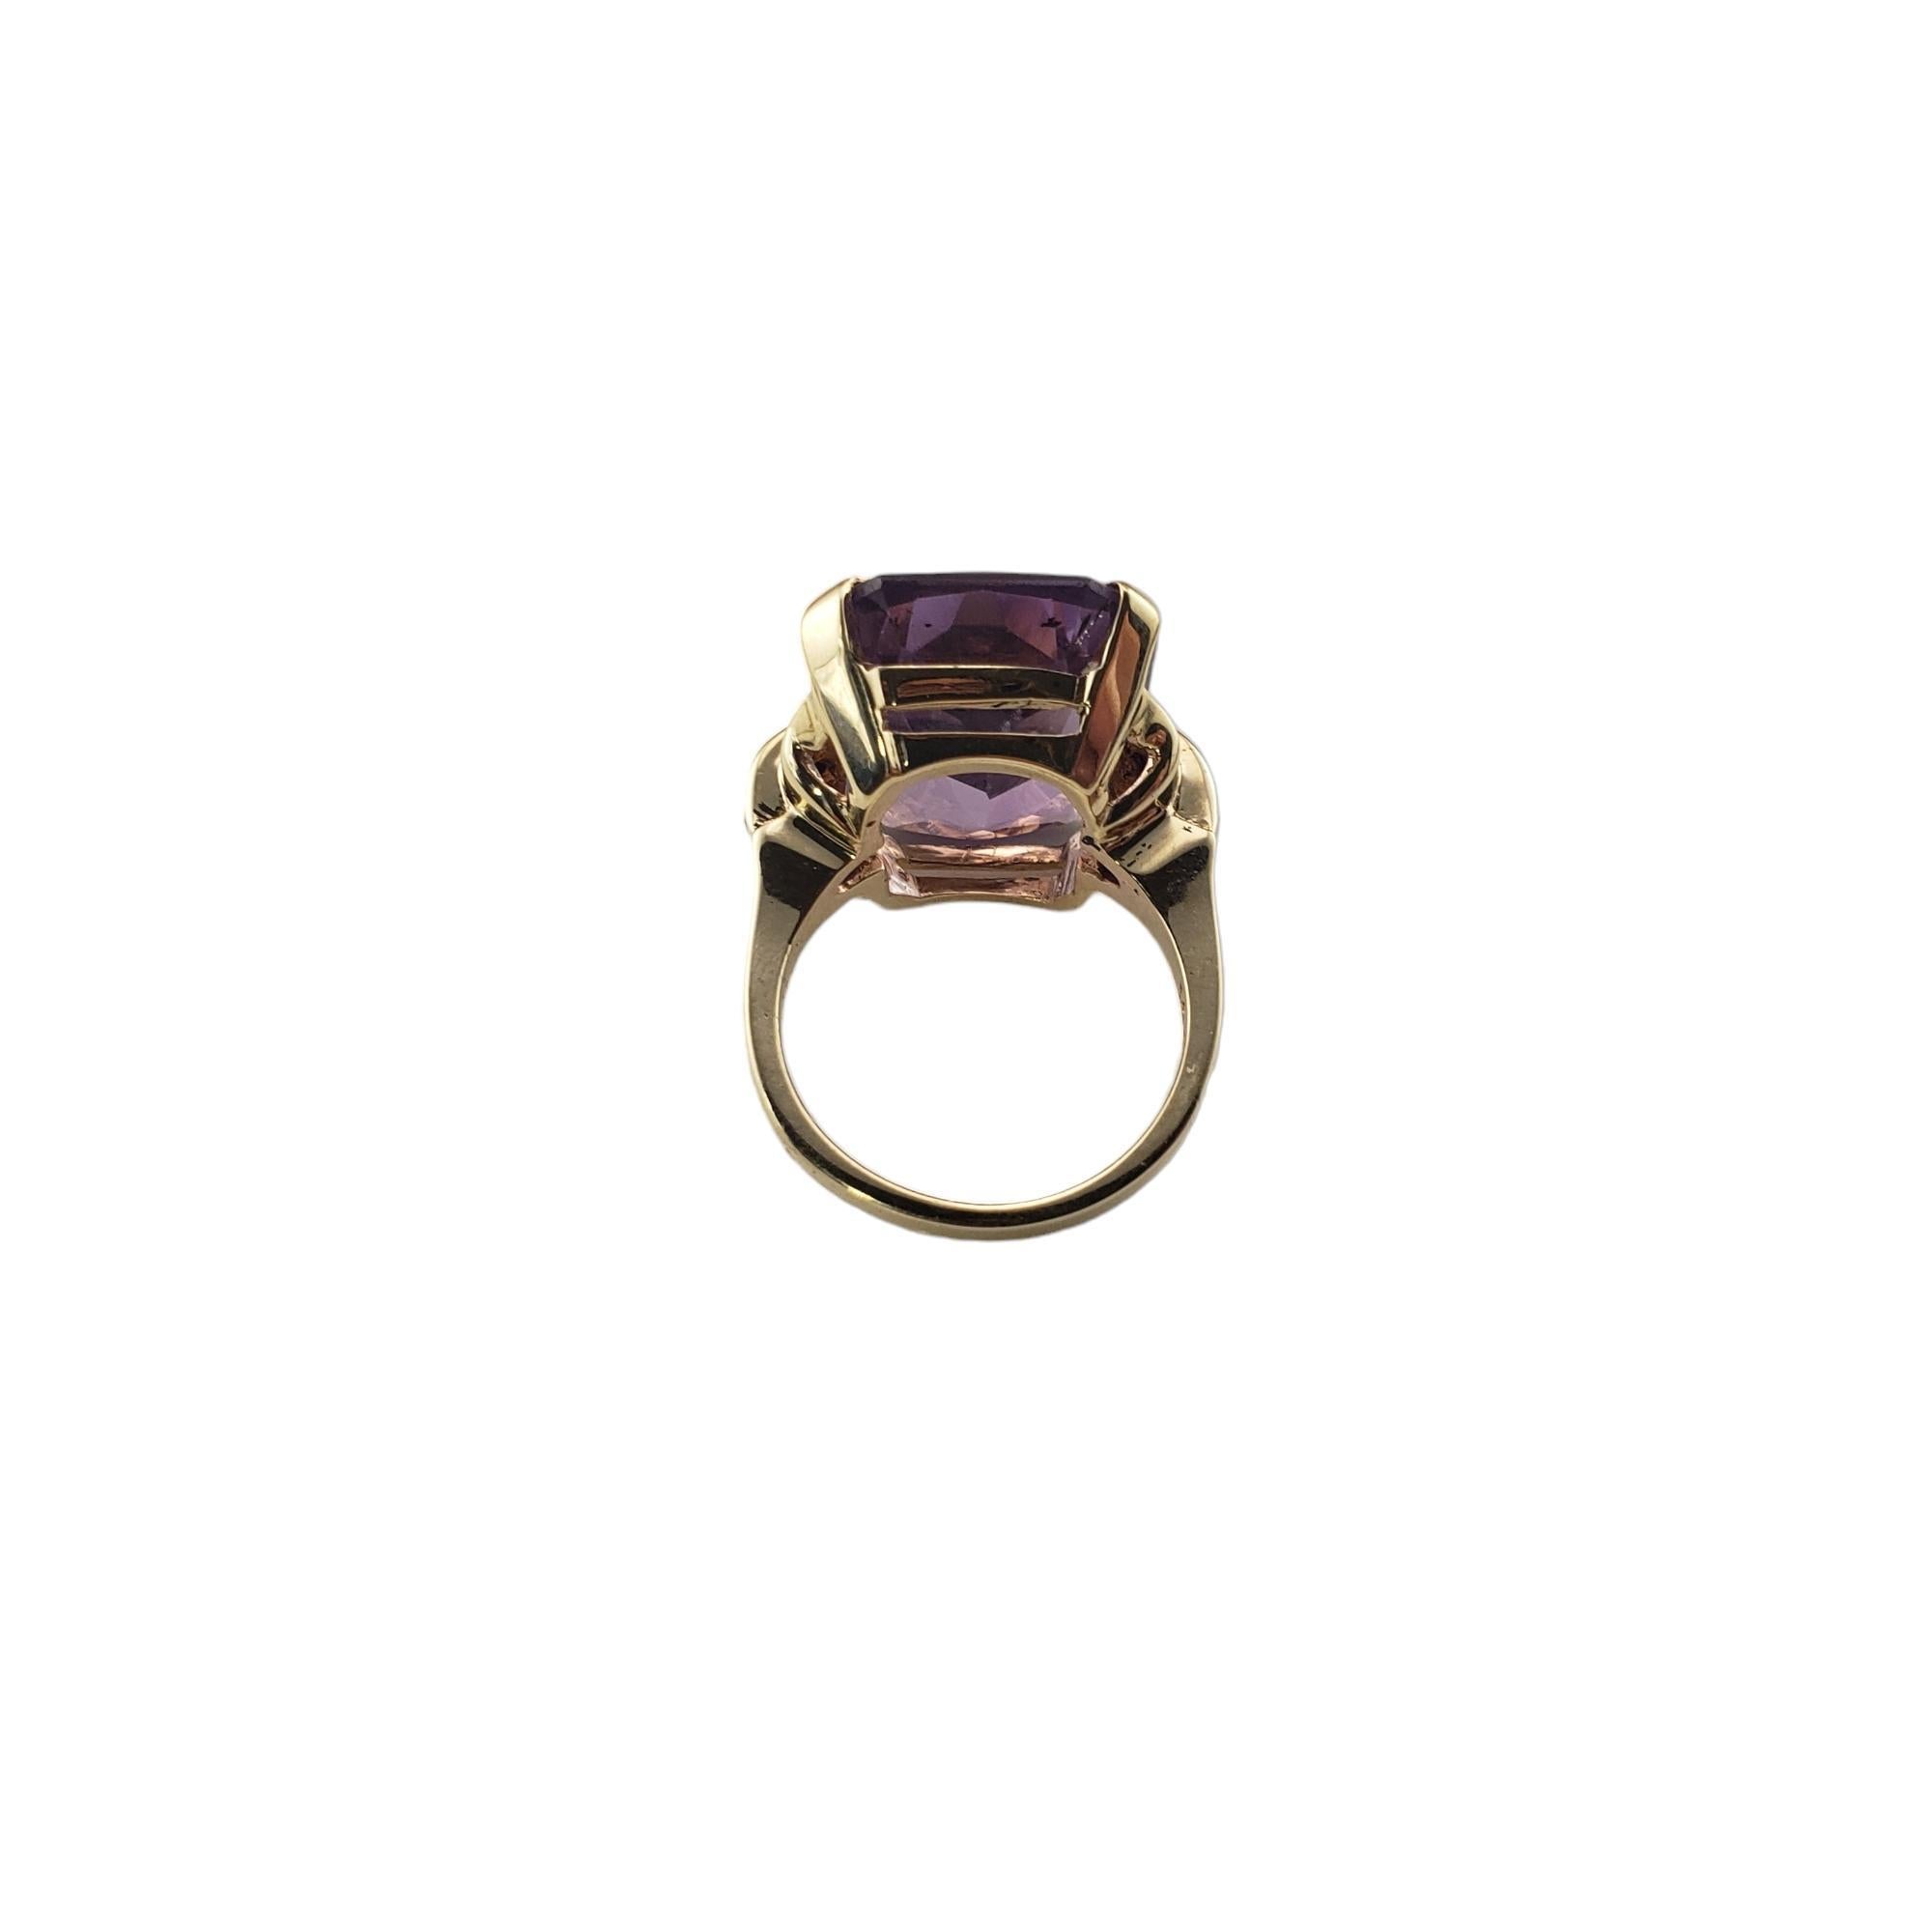 Women's  14K Yellow Gold Amethyst and Garnet Ring Size 6.75 #15463 For Sale